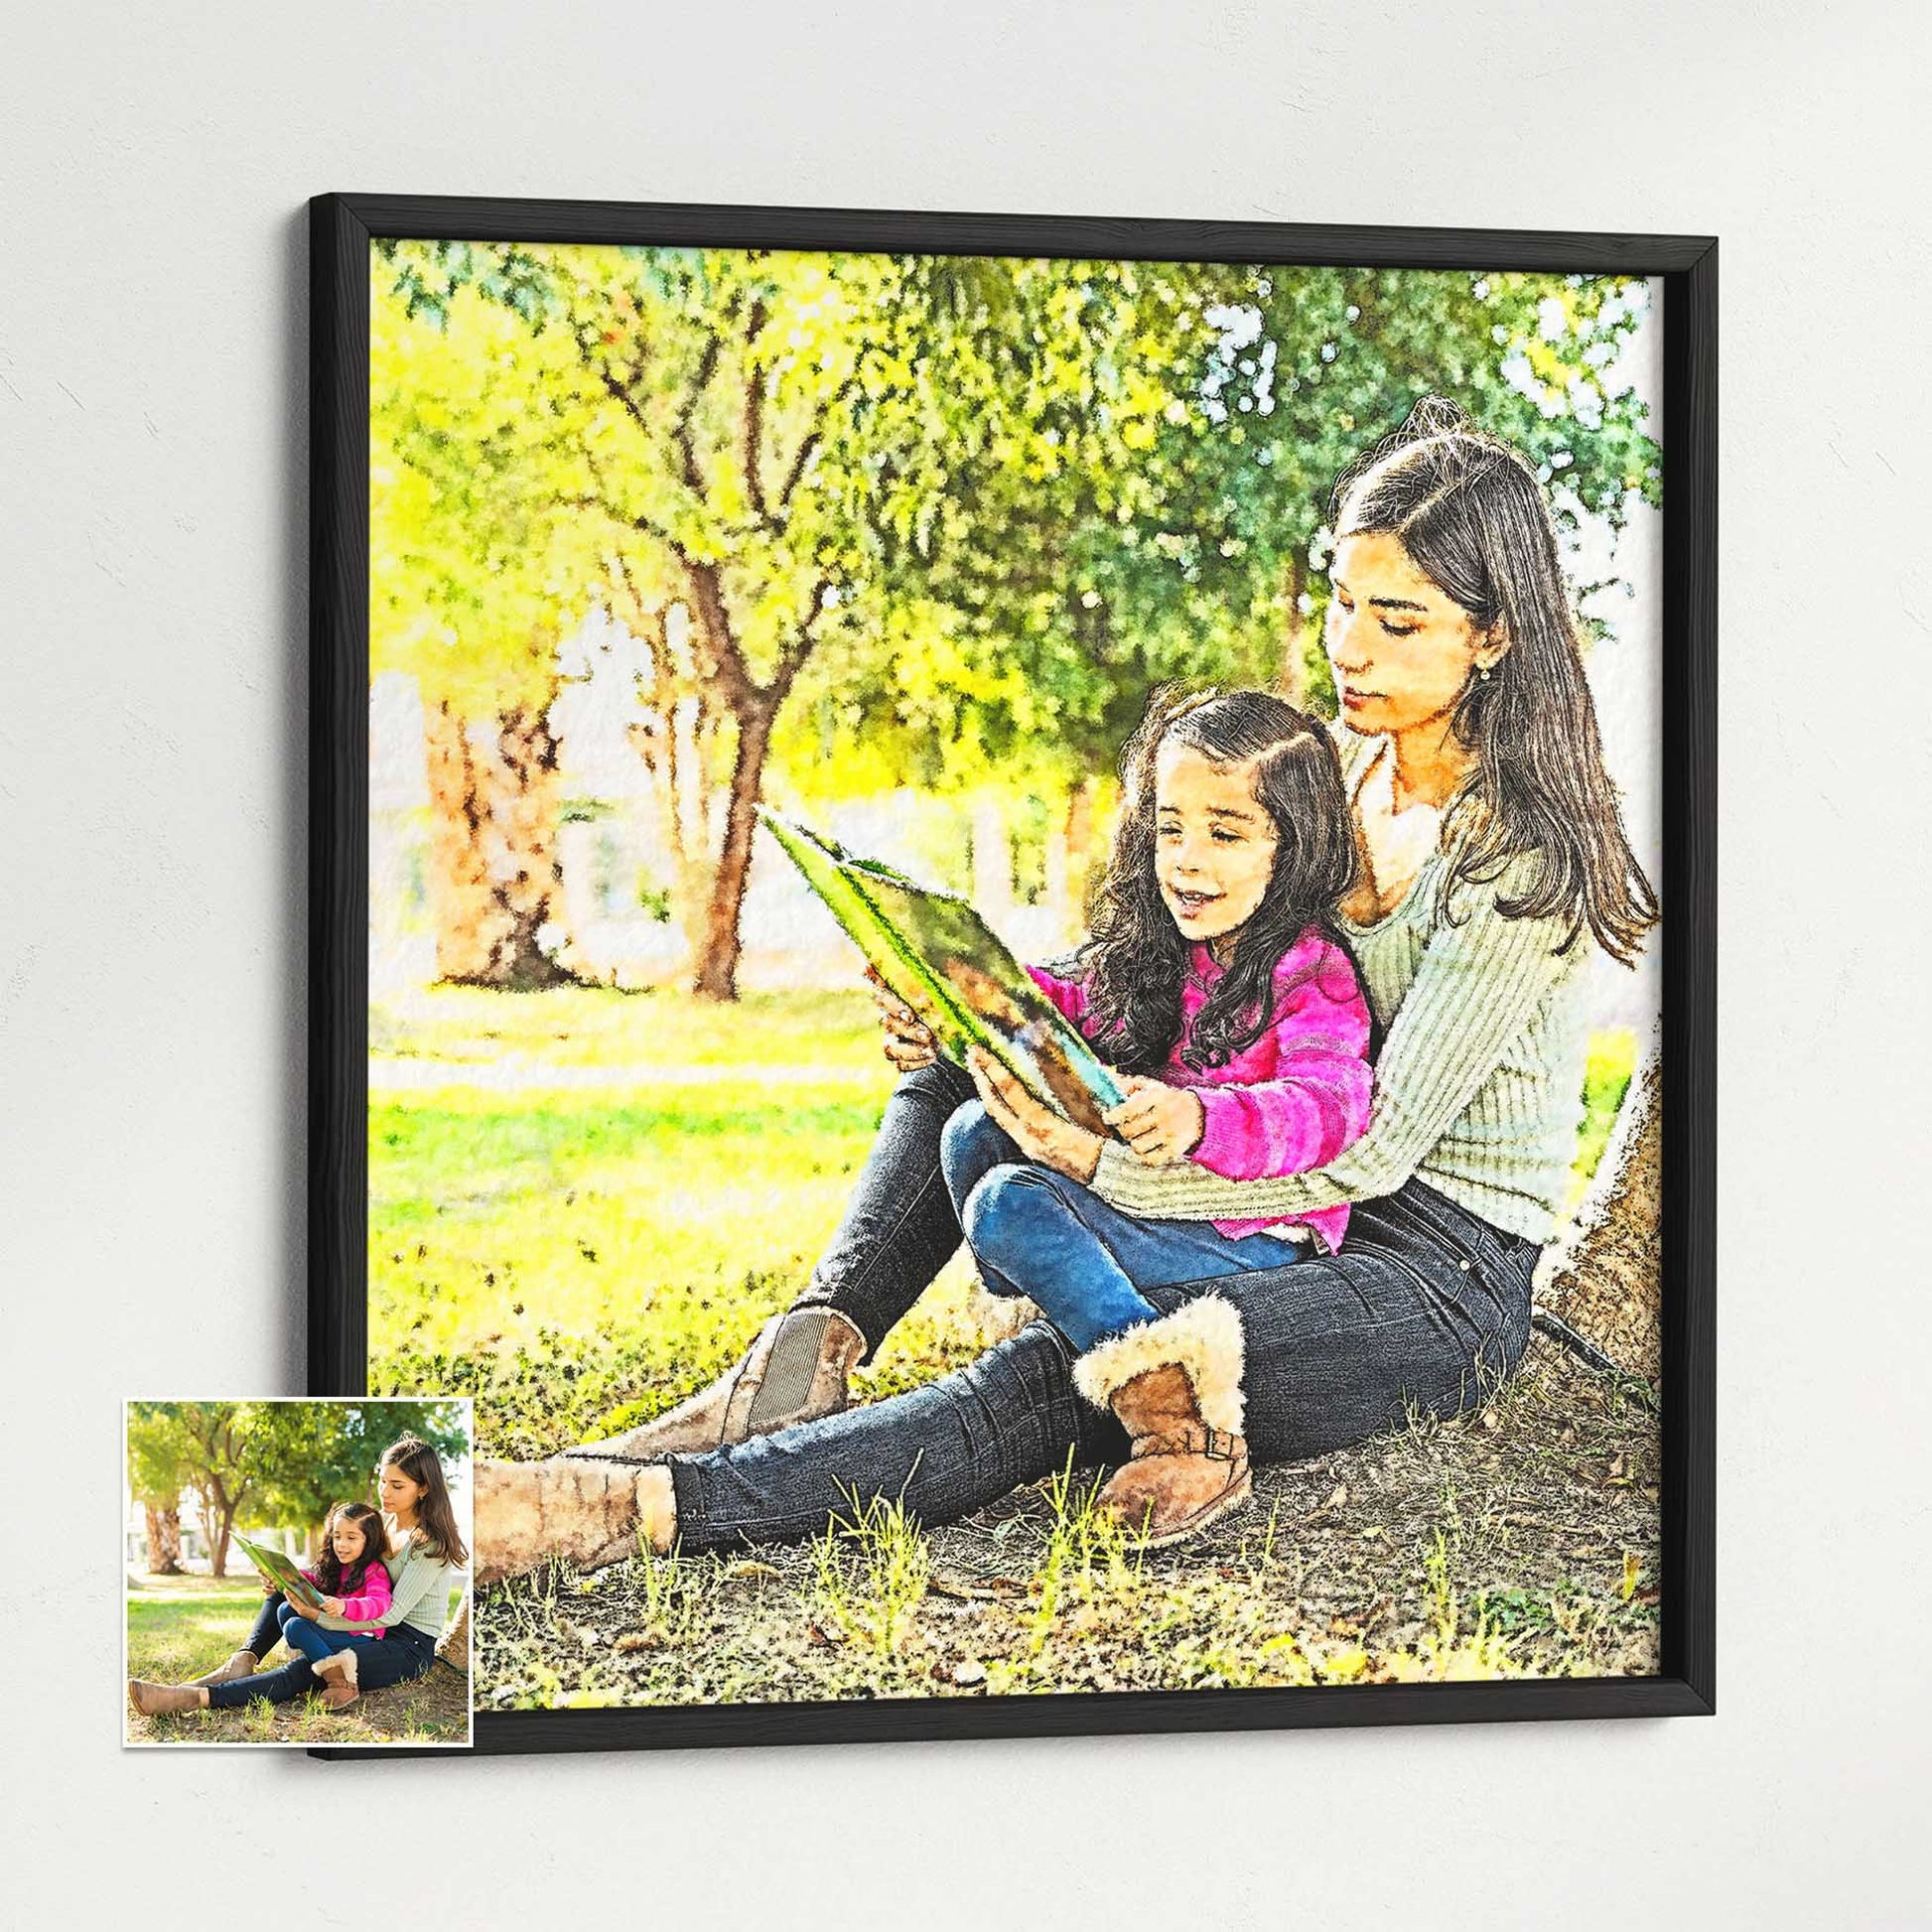 Elevate your art collection with a Personalised Watercolor Painting Framed Print. This exquisite masterpiece combines the elegance of watercolor painting with the sentimental value of your chosen photo. Its refined wooden frame